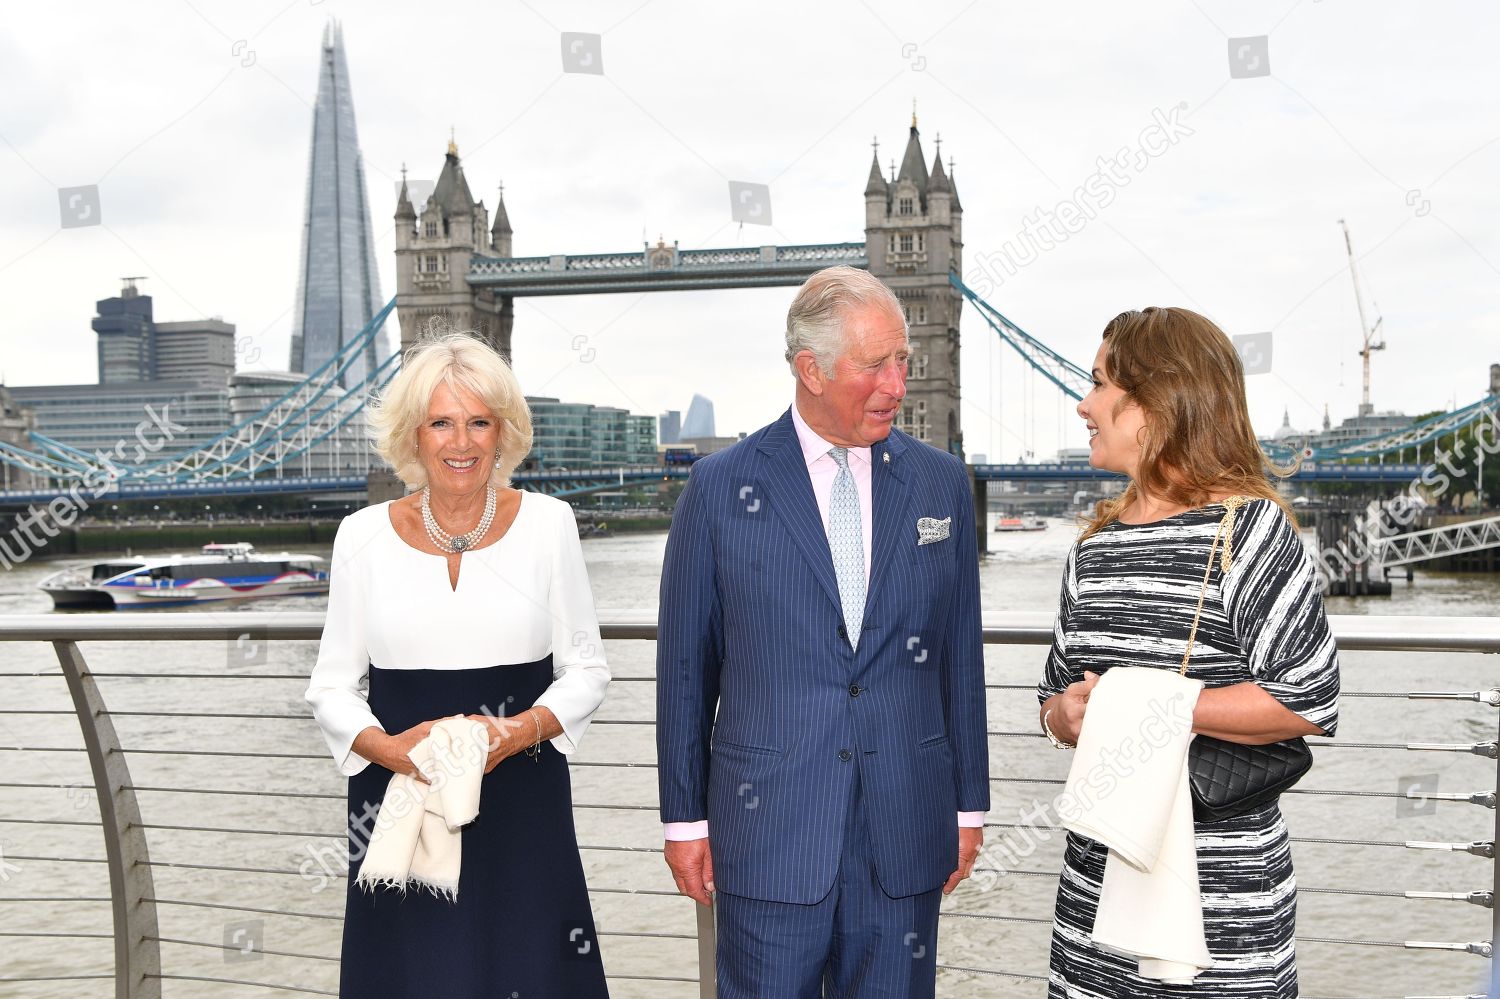 prince-charles-carries-out-royal-engagements-london-uk-shutterstock-editorial-9863246am.jpg